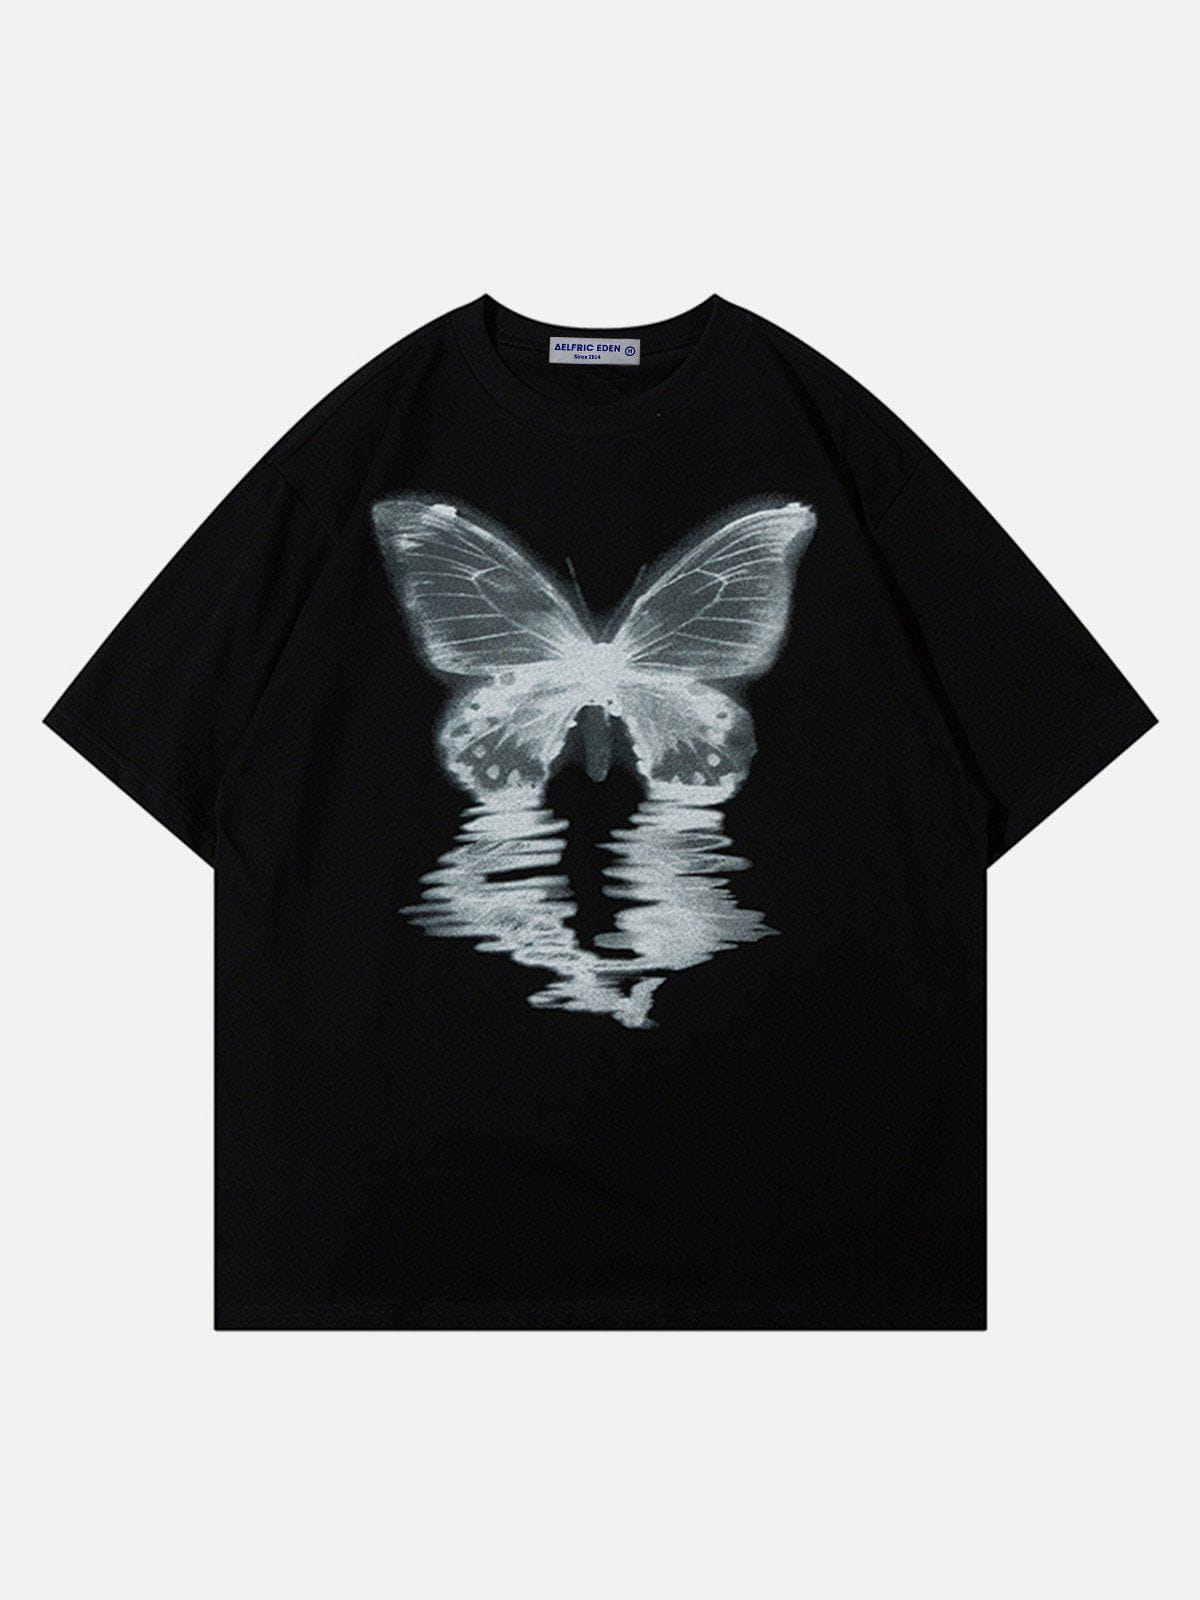 Butterfly Inverted Image Print Tee